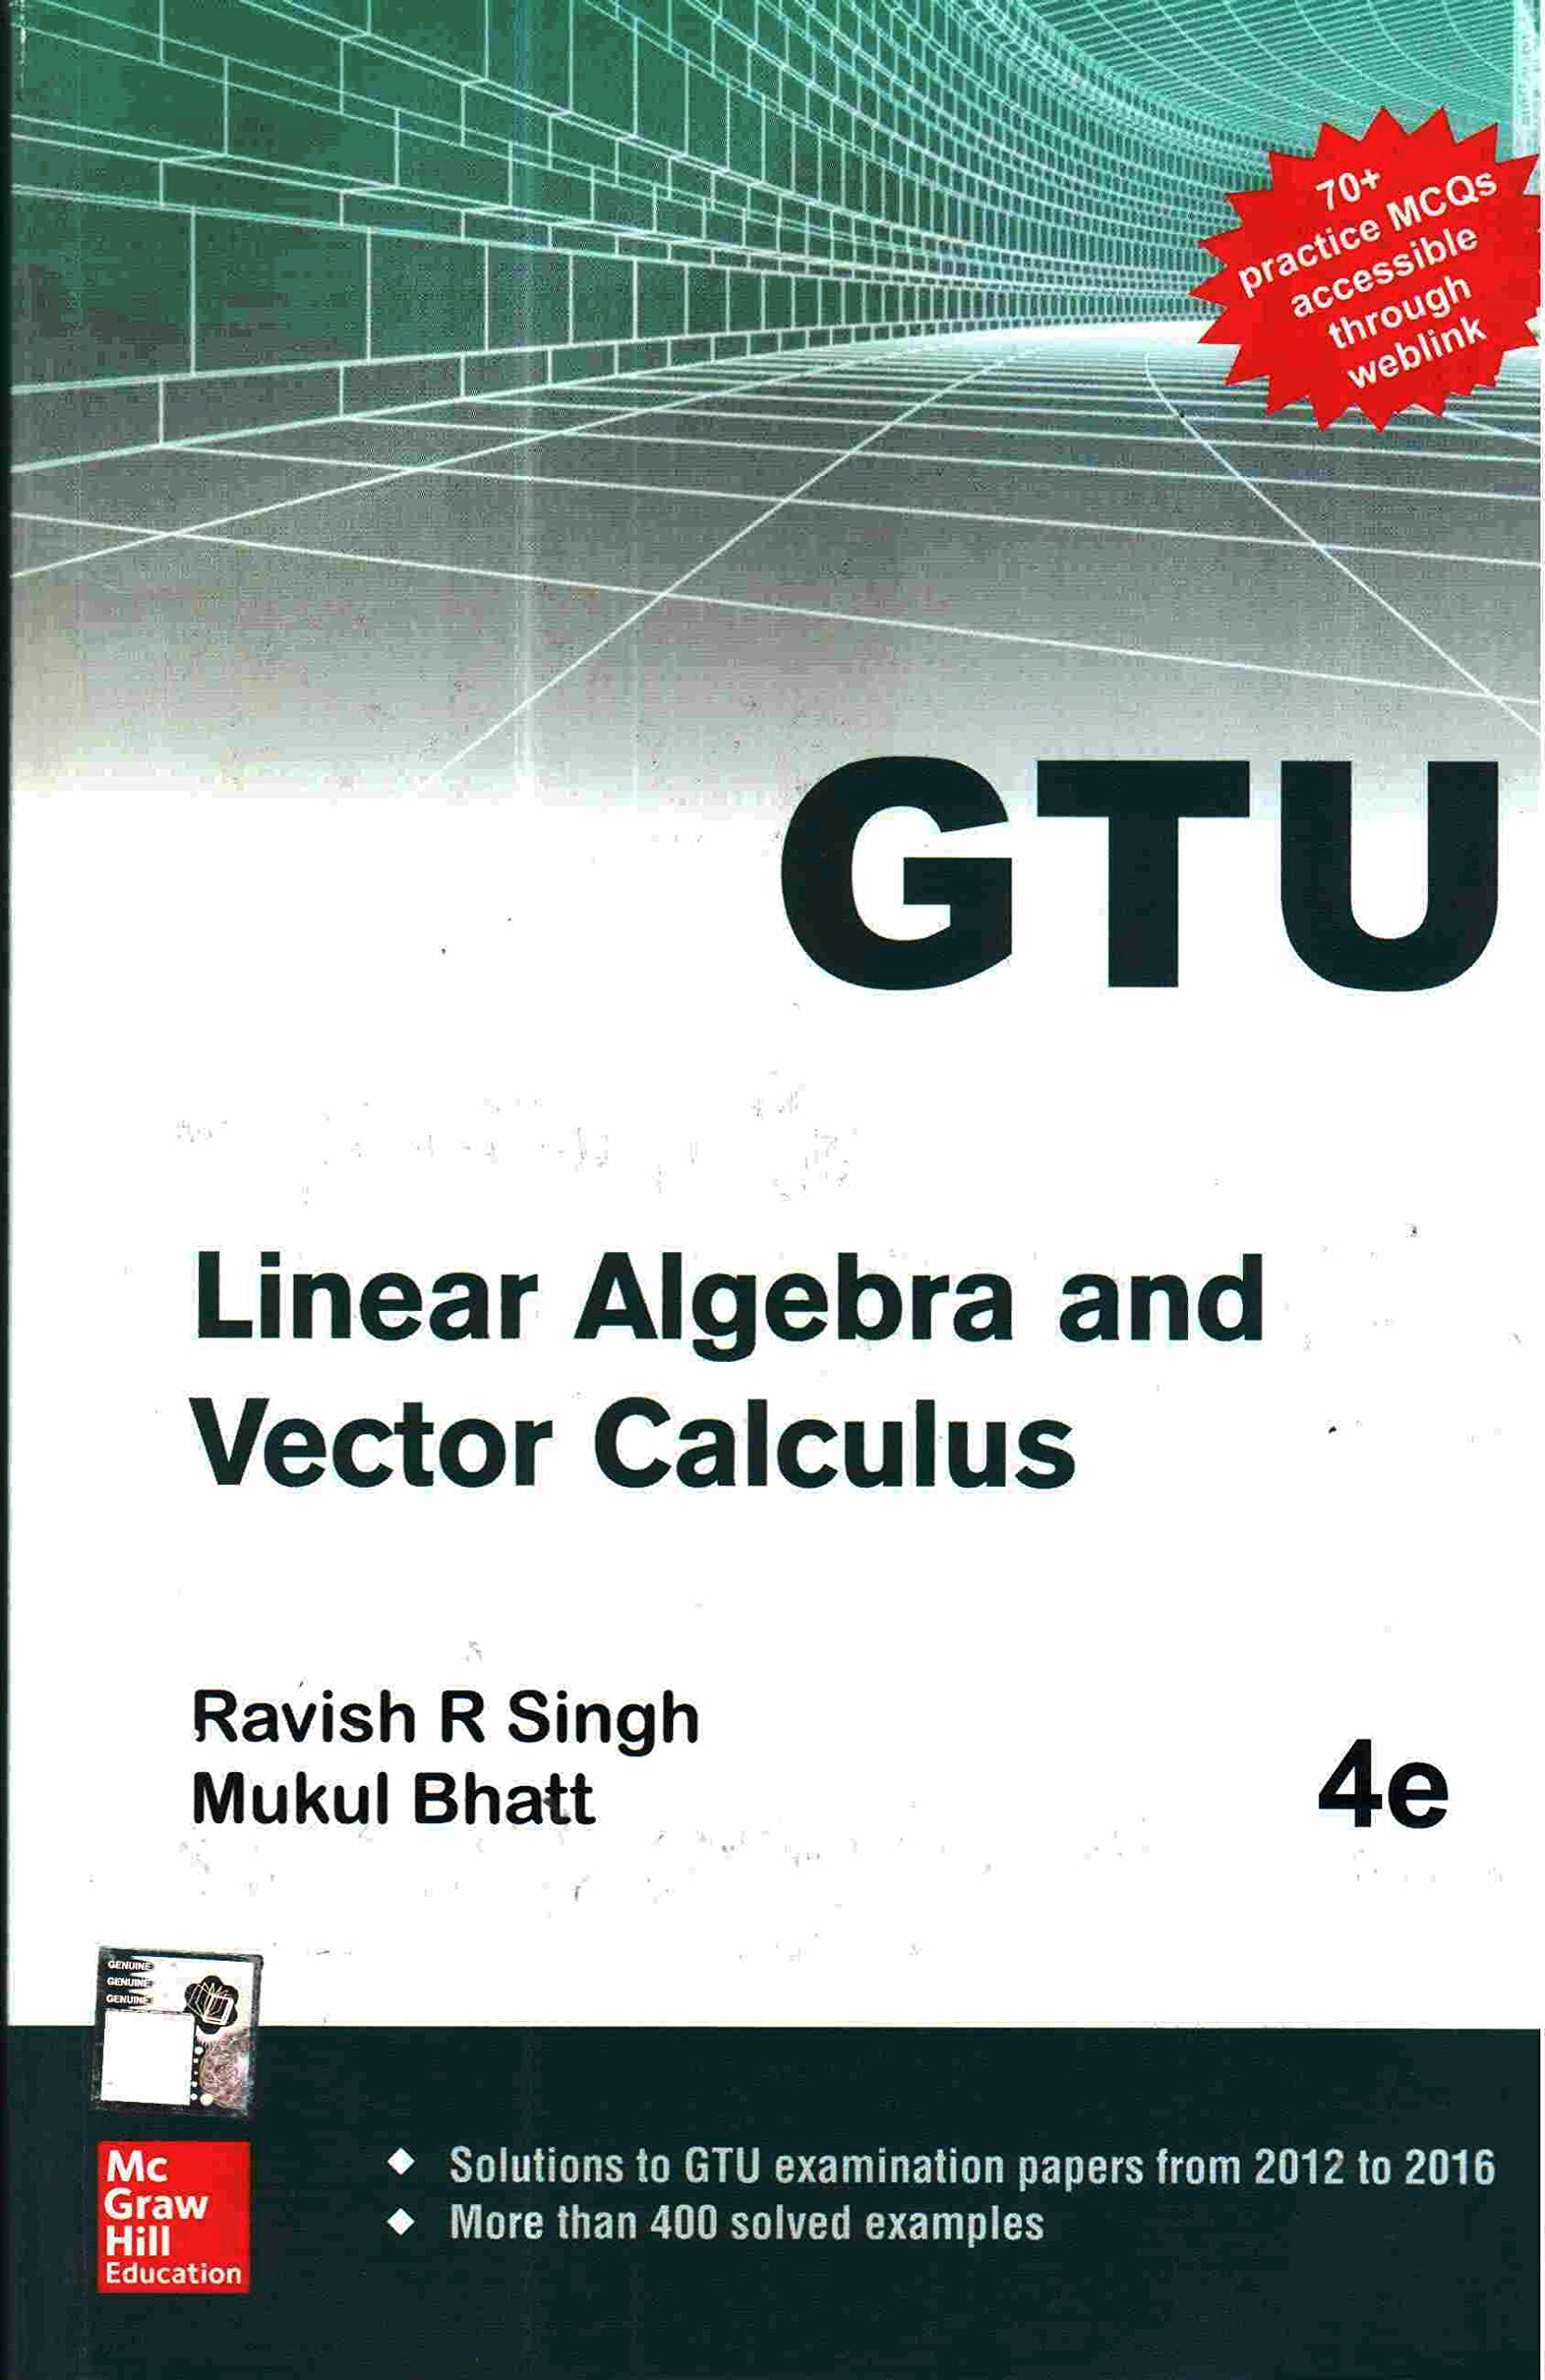 Linear Algebra and Vector Calculus Free PDF Book